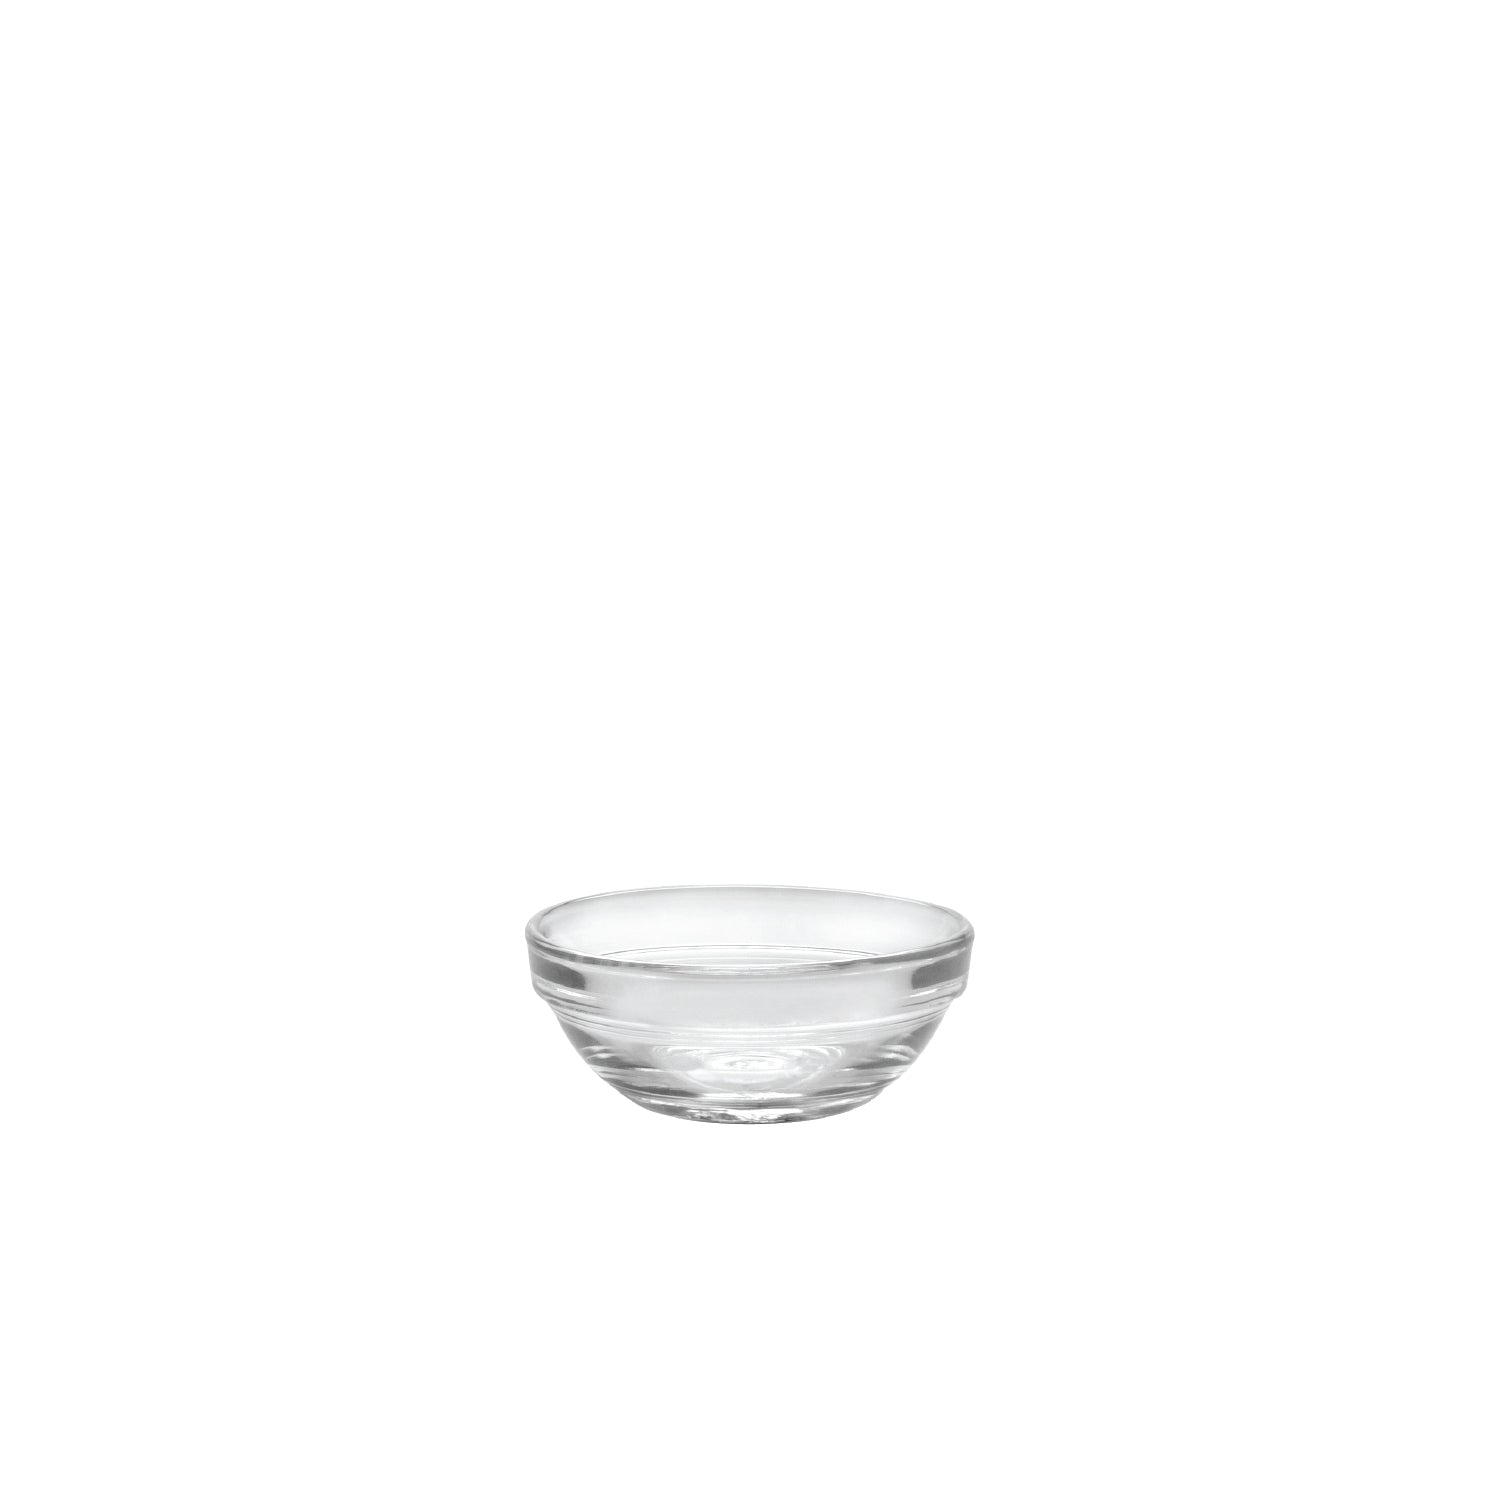 Le Gigogne® Stackable Clear Bowl